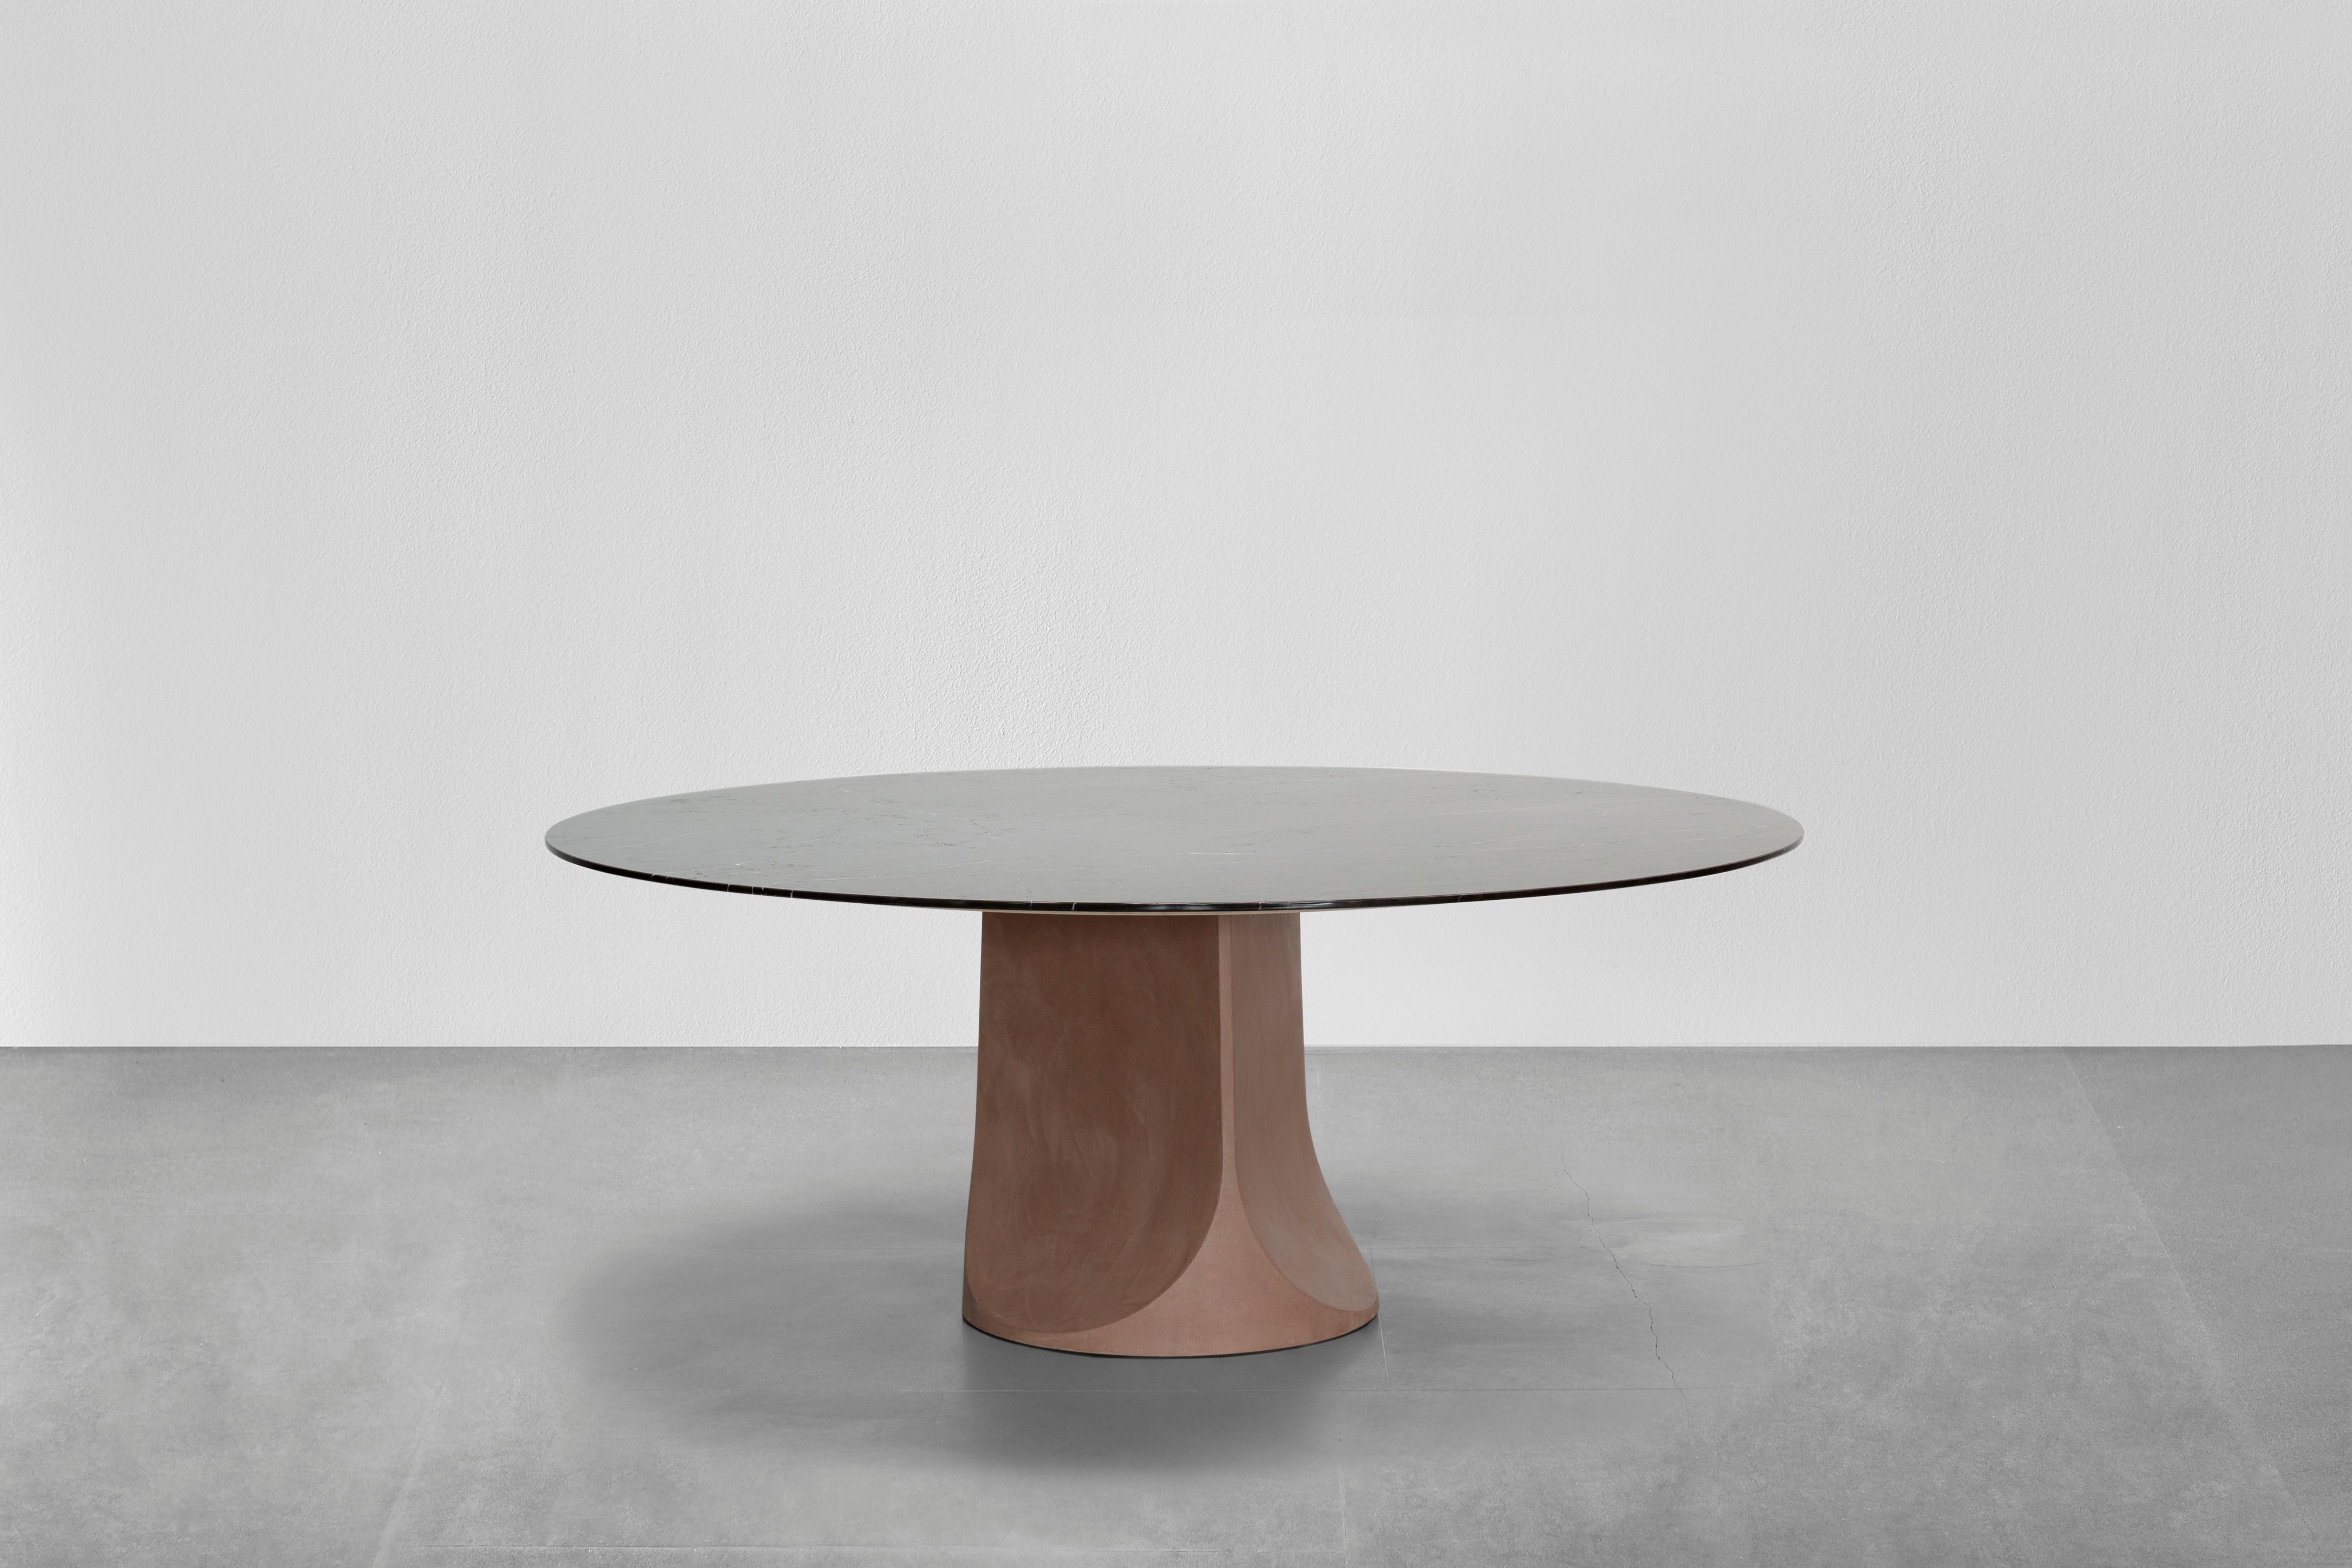 Italian Tacchini Togrul Marble Table Designed by Gordon Guillaumier  in STOCK